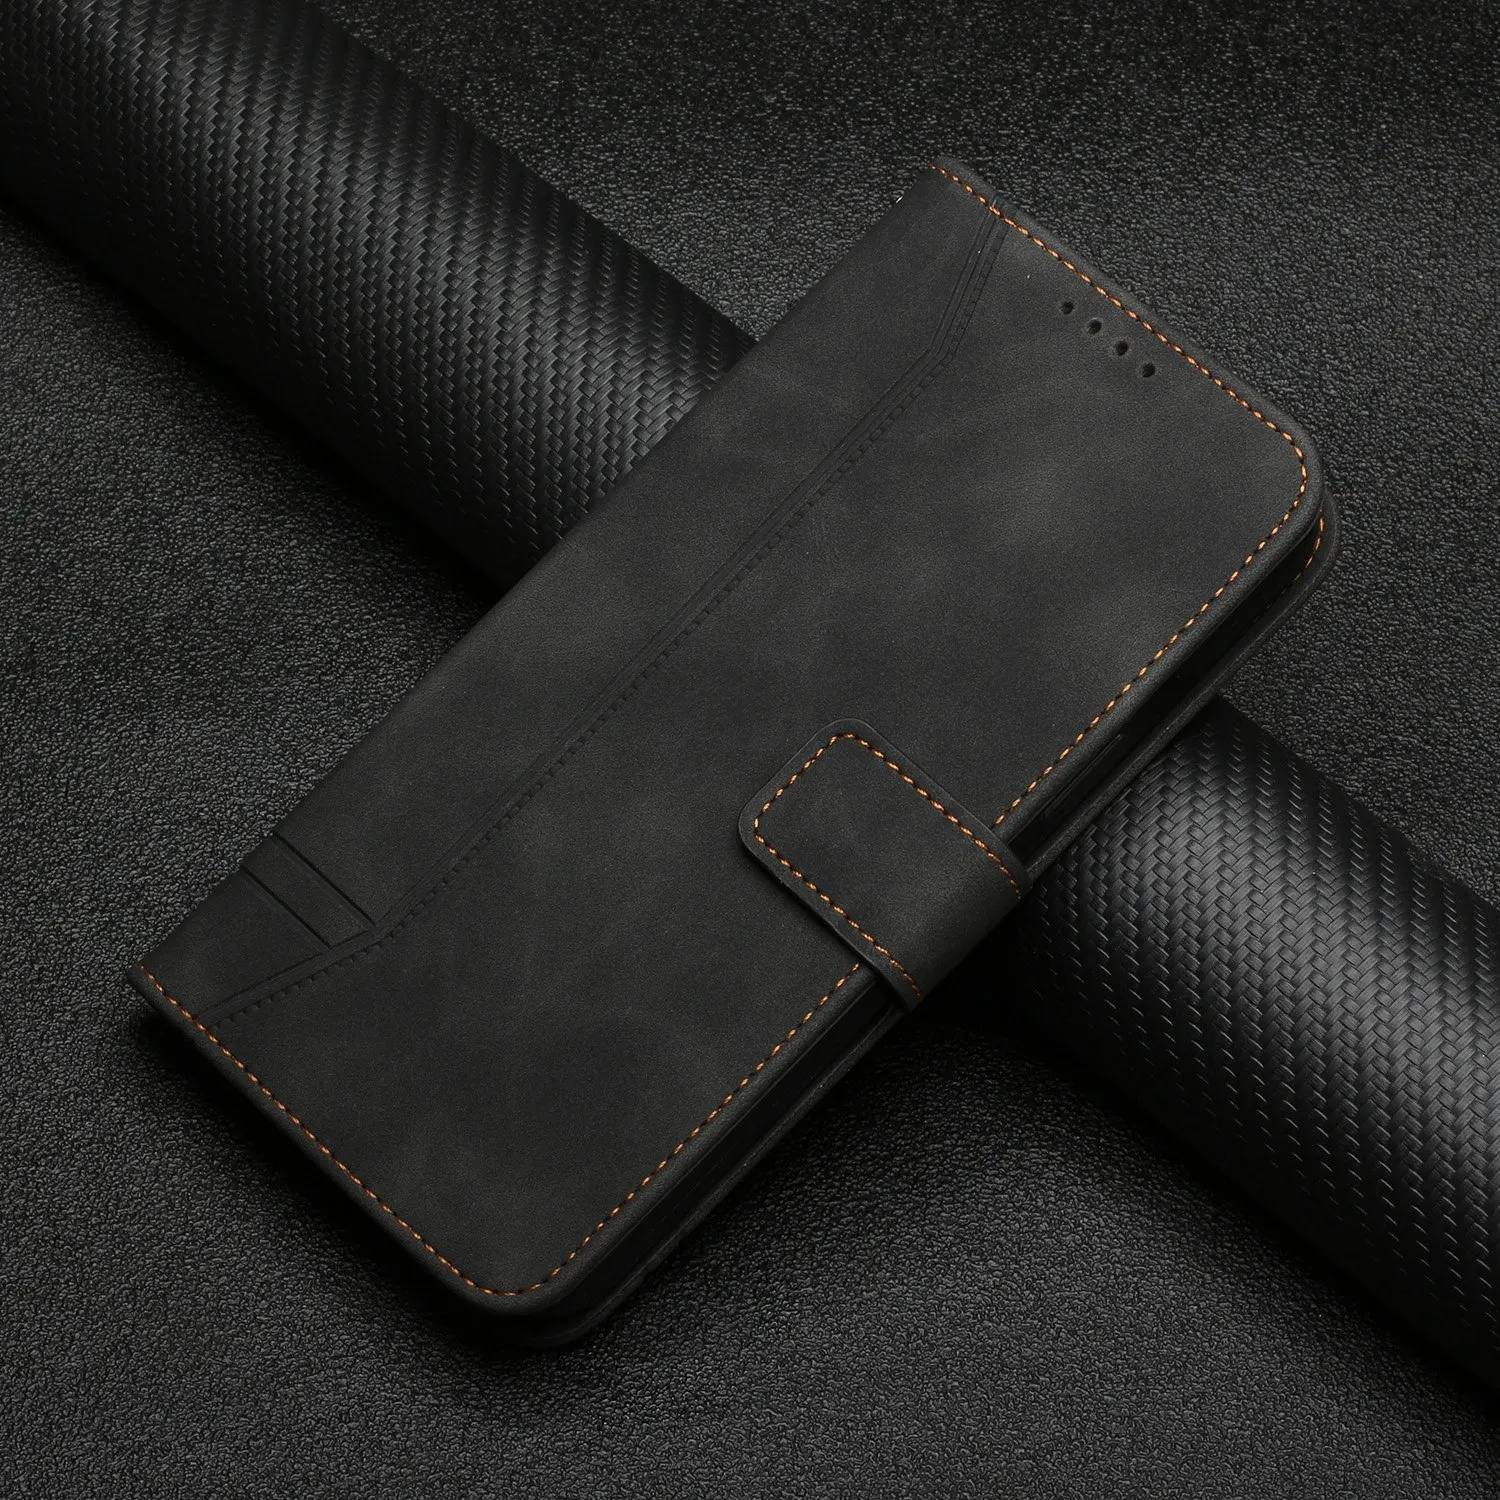 leather iphone 11 Pro Max case Flip Wallet Leather Case For Xiaomi Mi 11 Lite 5X 6X 9 SE Lite 9T CC9E Mi Note 10 10T Lite Pro 10s Coque Stand Book Phone Cover iphone 11 Pro Max  silicone case